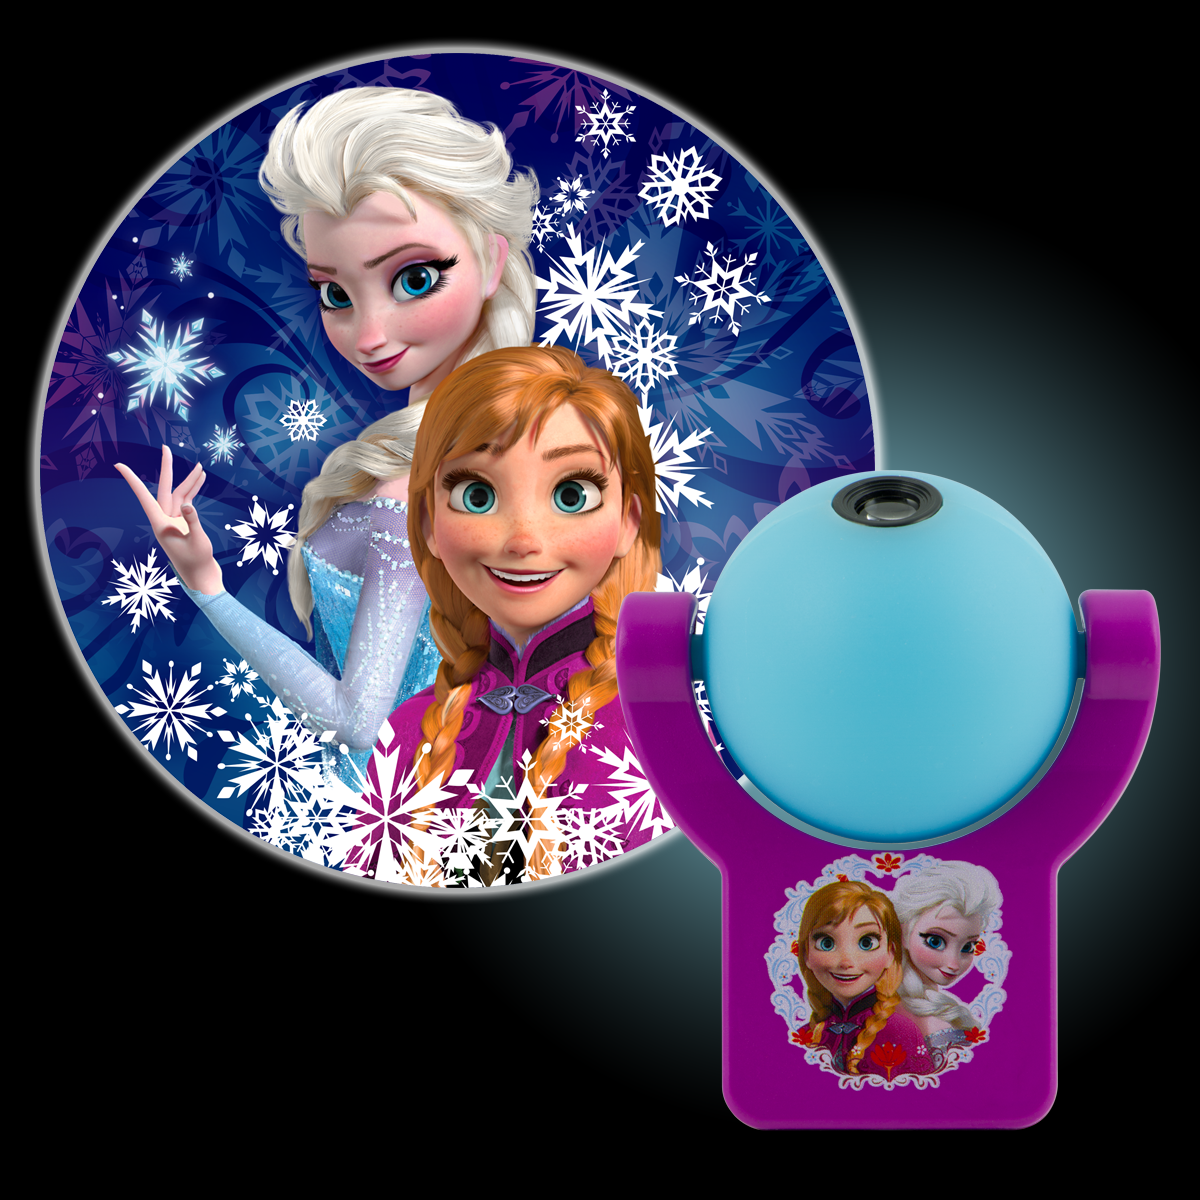 Projectables Disney Frozen LED Plug-In Night Light, Elsa & Anna, 13340 - image 1 of 5